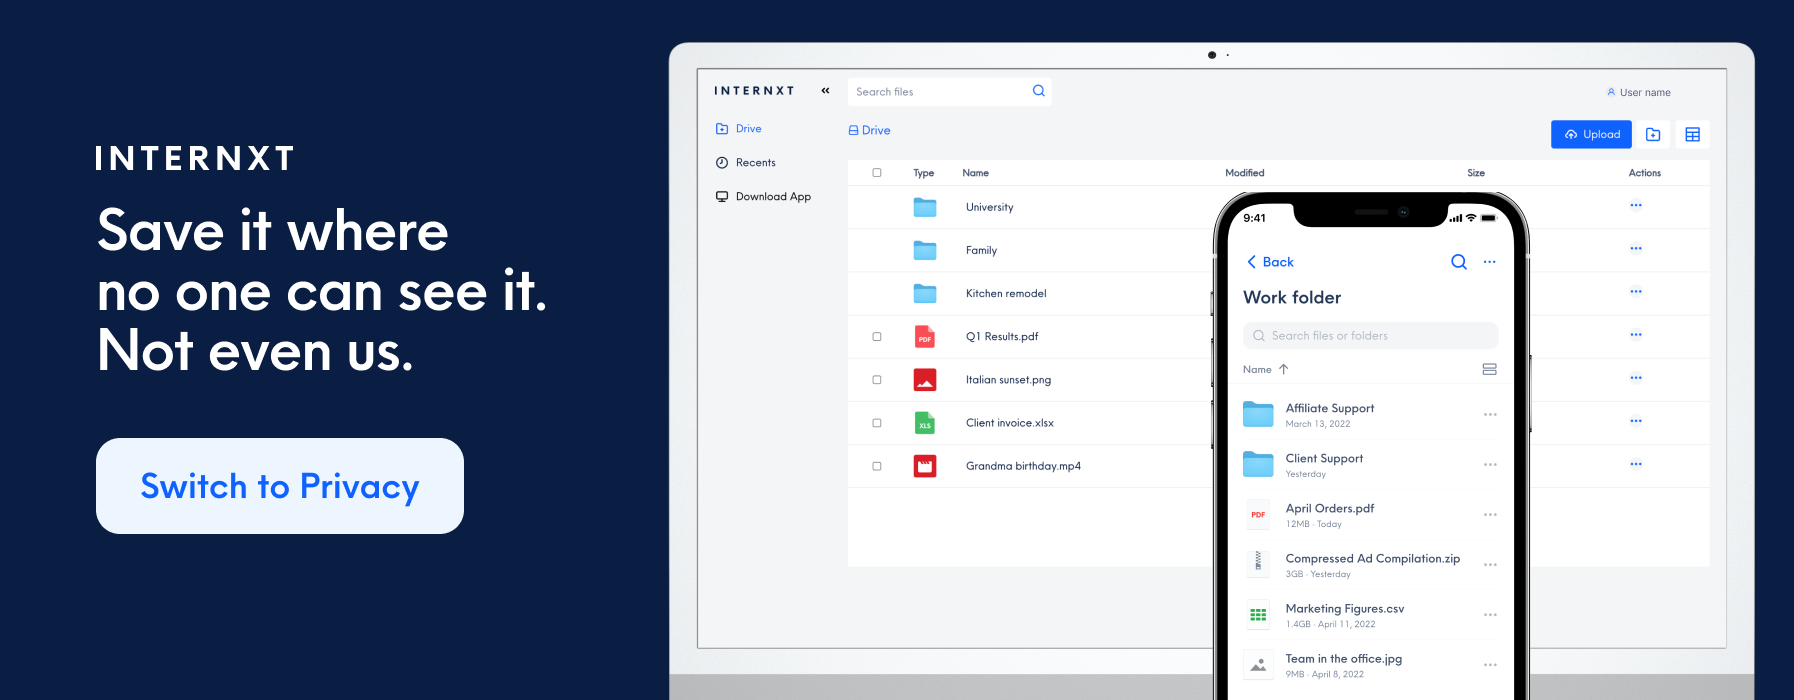 Internxt cloud storage has very intuitive features and functions